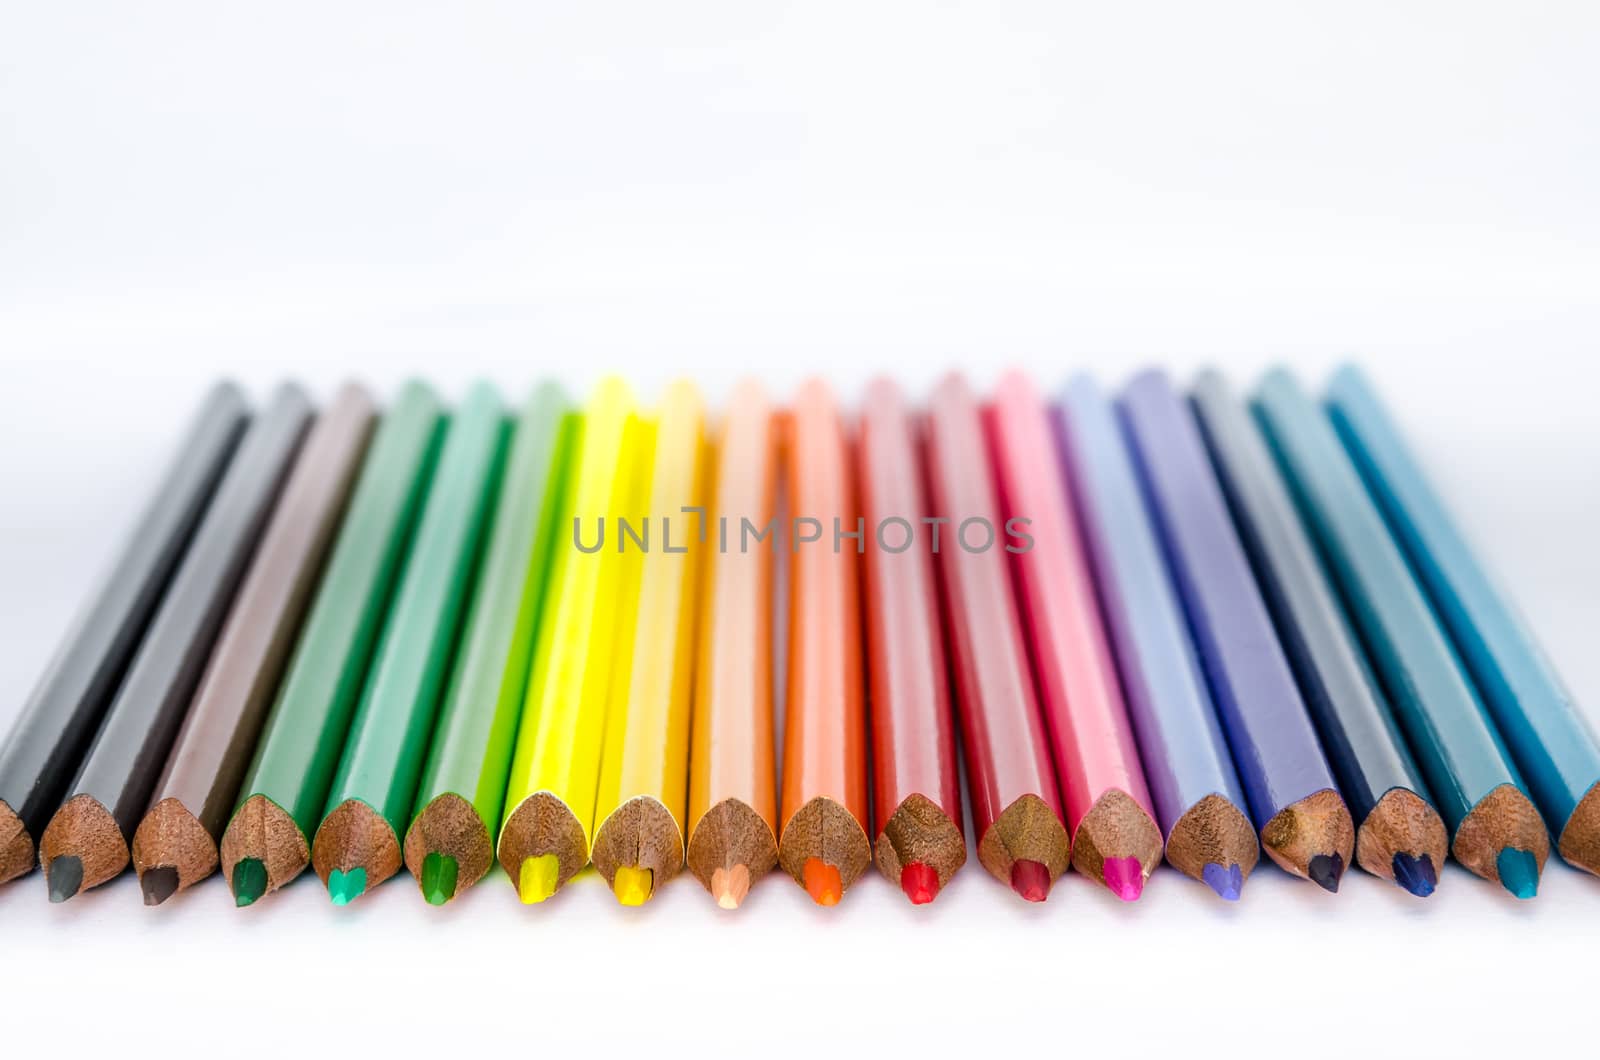 Detail of colorful pencils in a row on white background